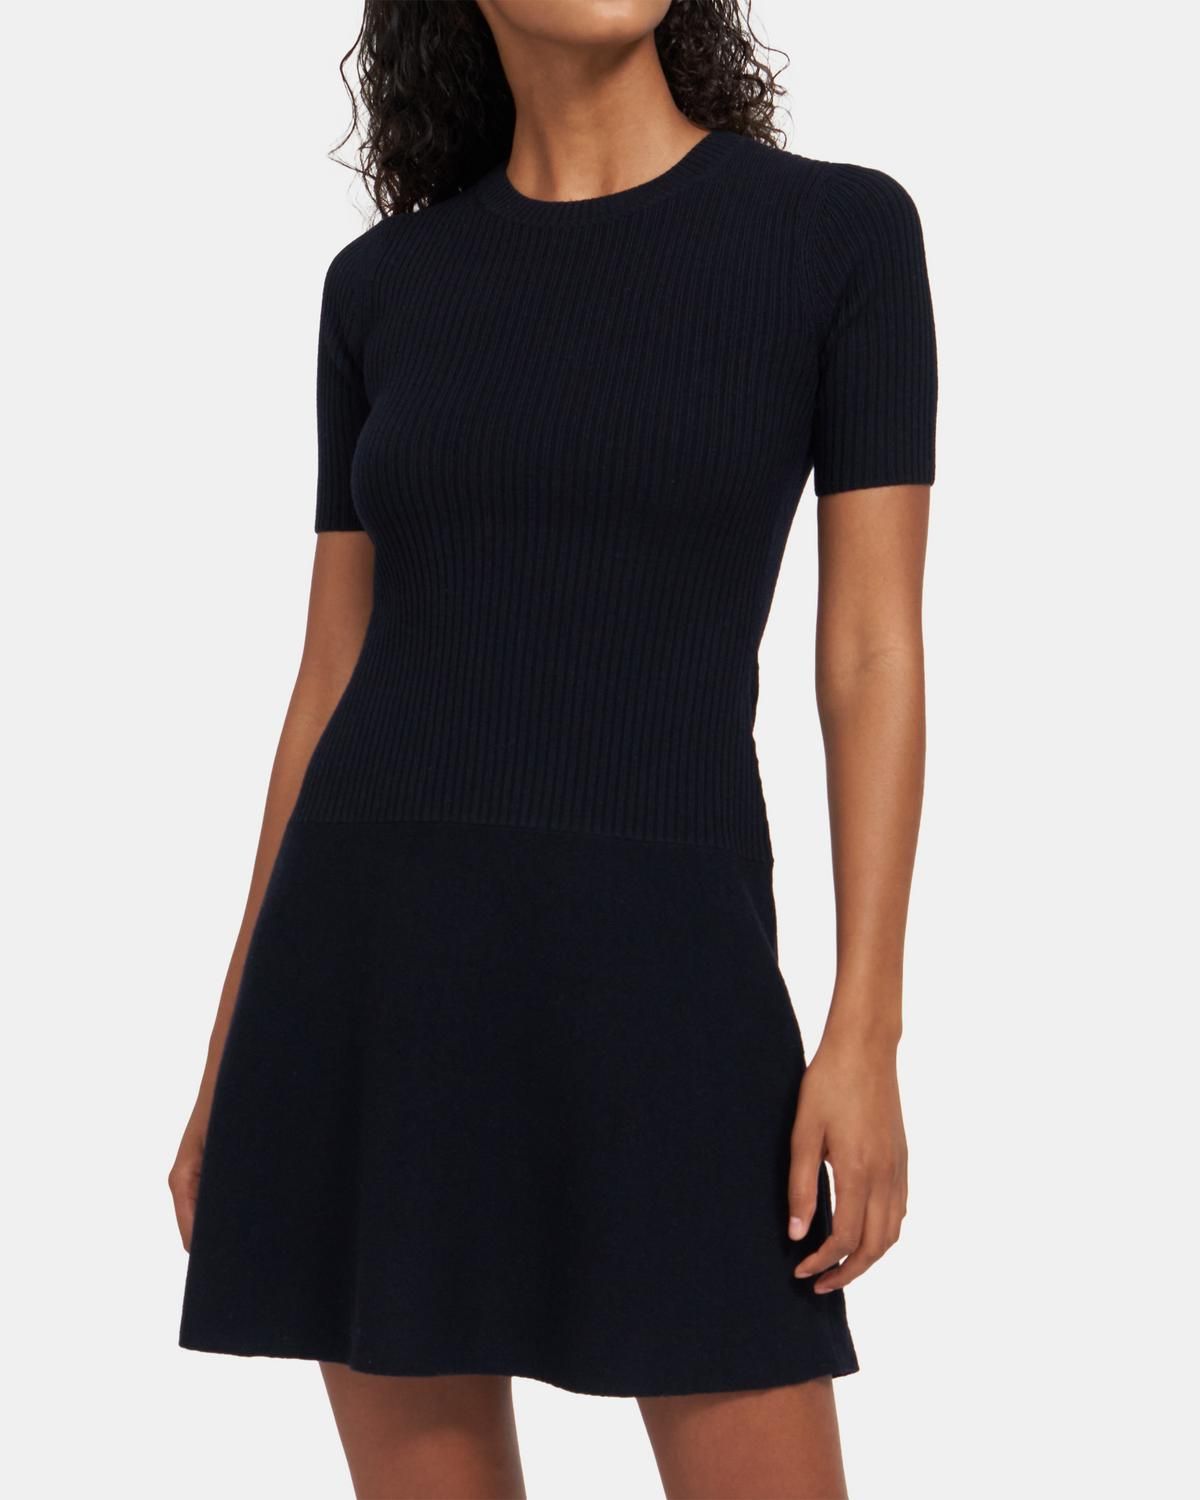 Crewneck Rib Dress in Stretch-Knit | Theory Outlet